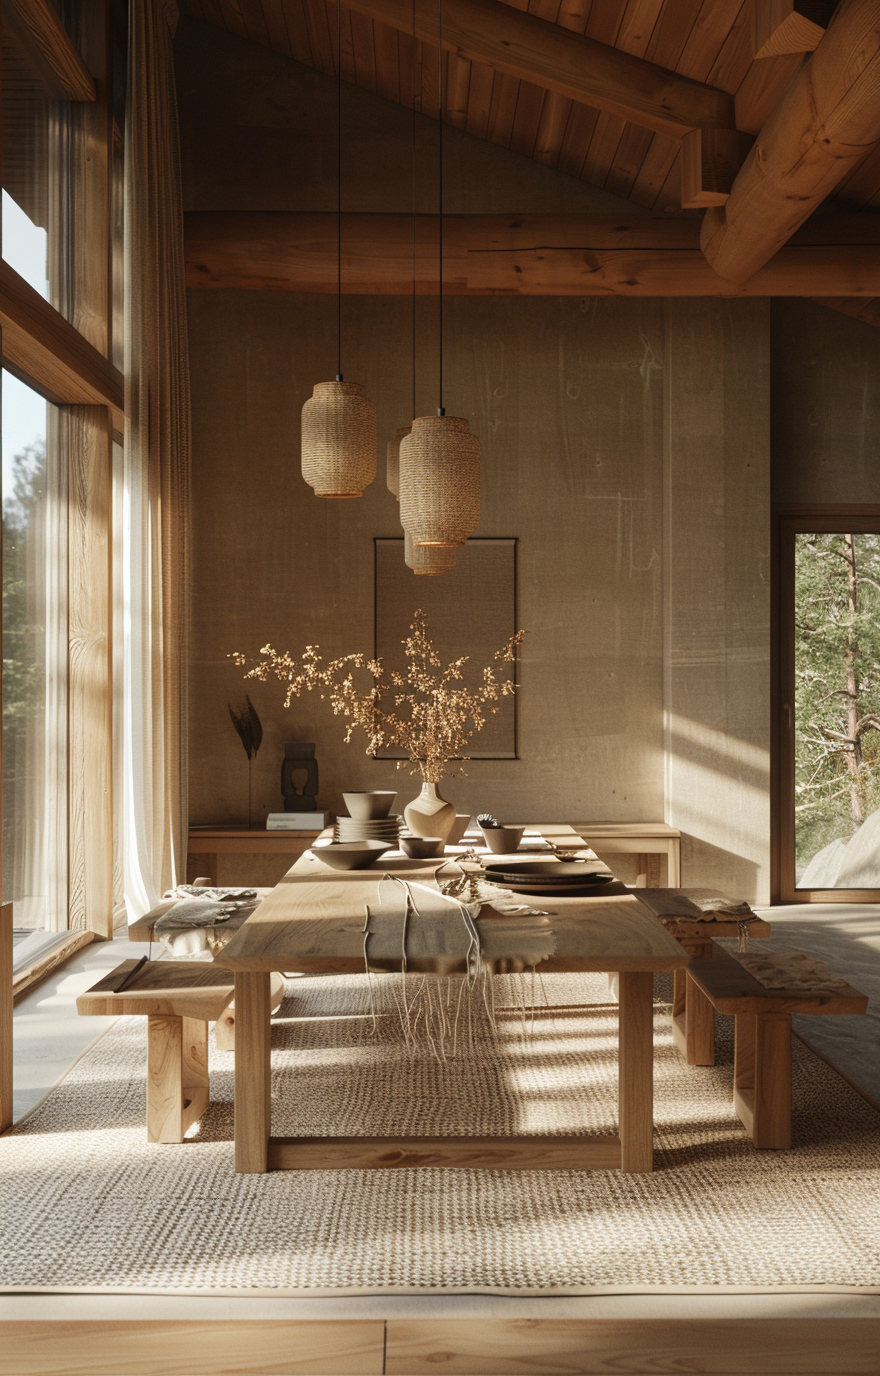 Japanese dining room highlighting architectural features like exposed wooden beams